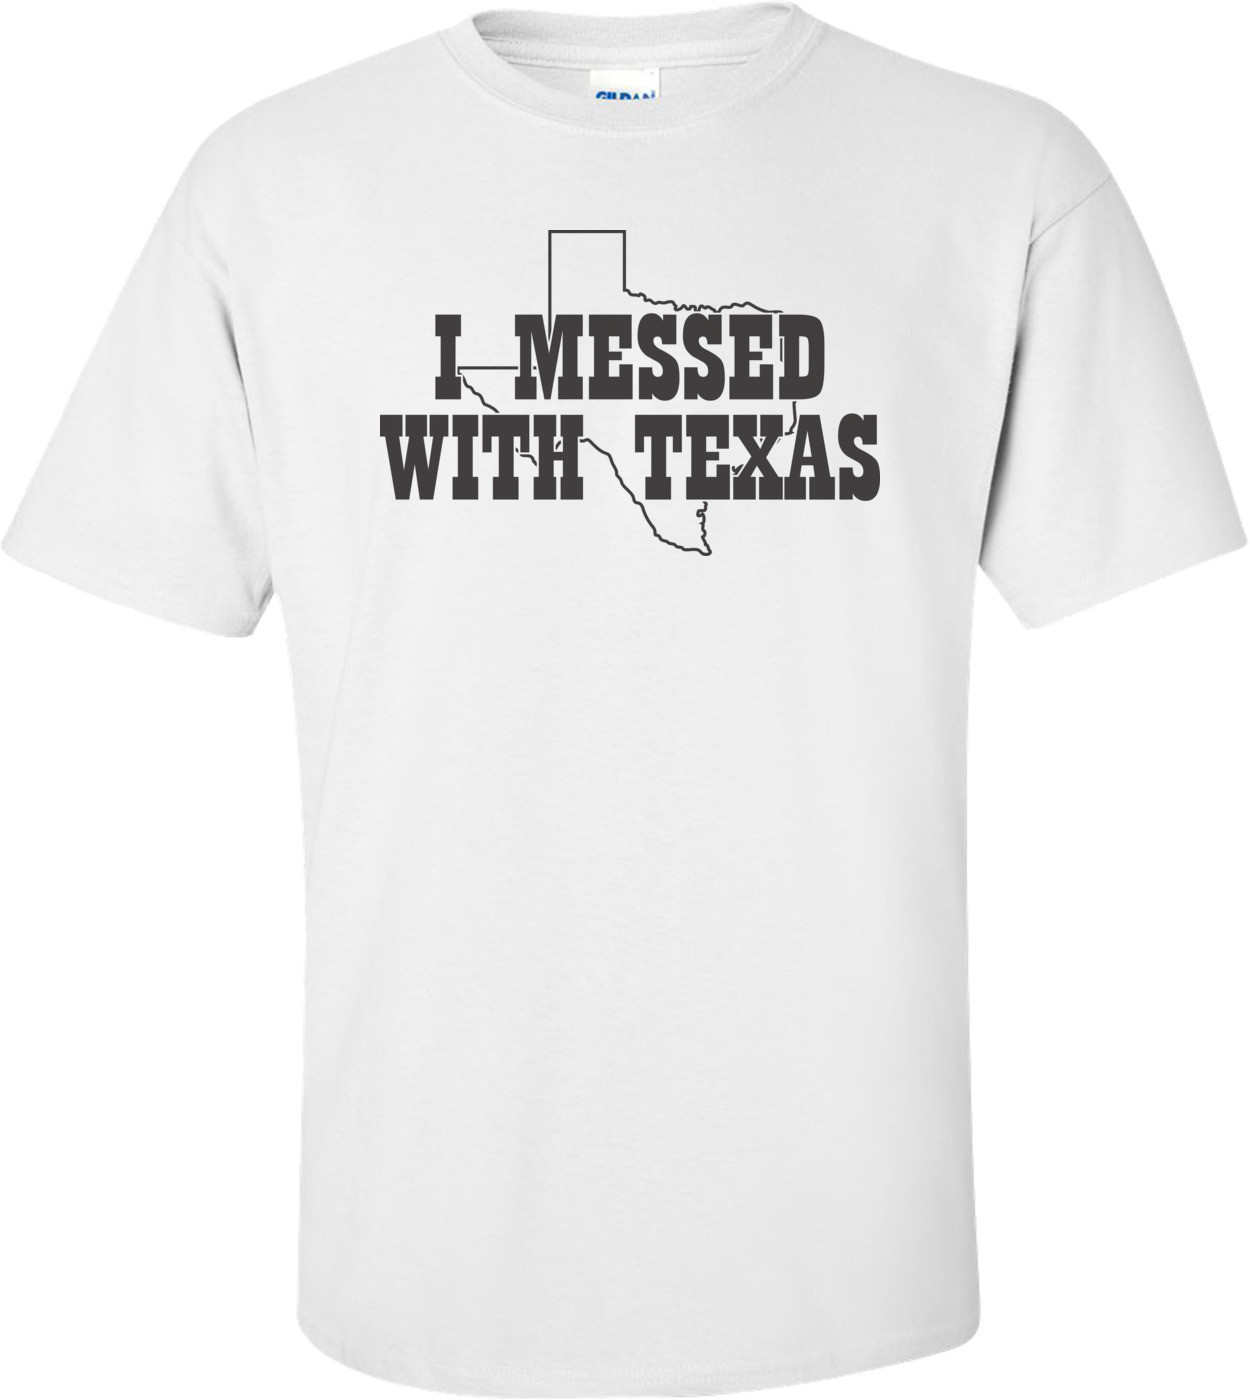 I Messed With Texas T-shirt